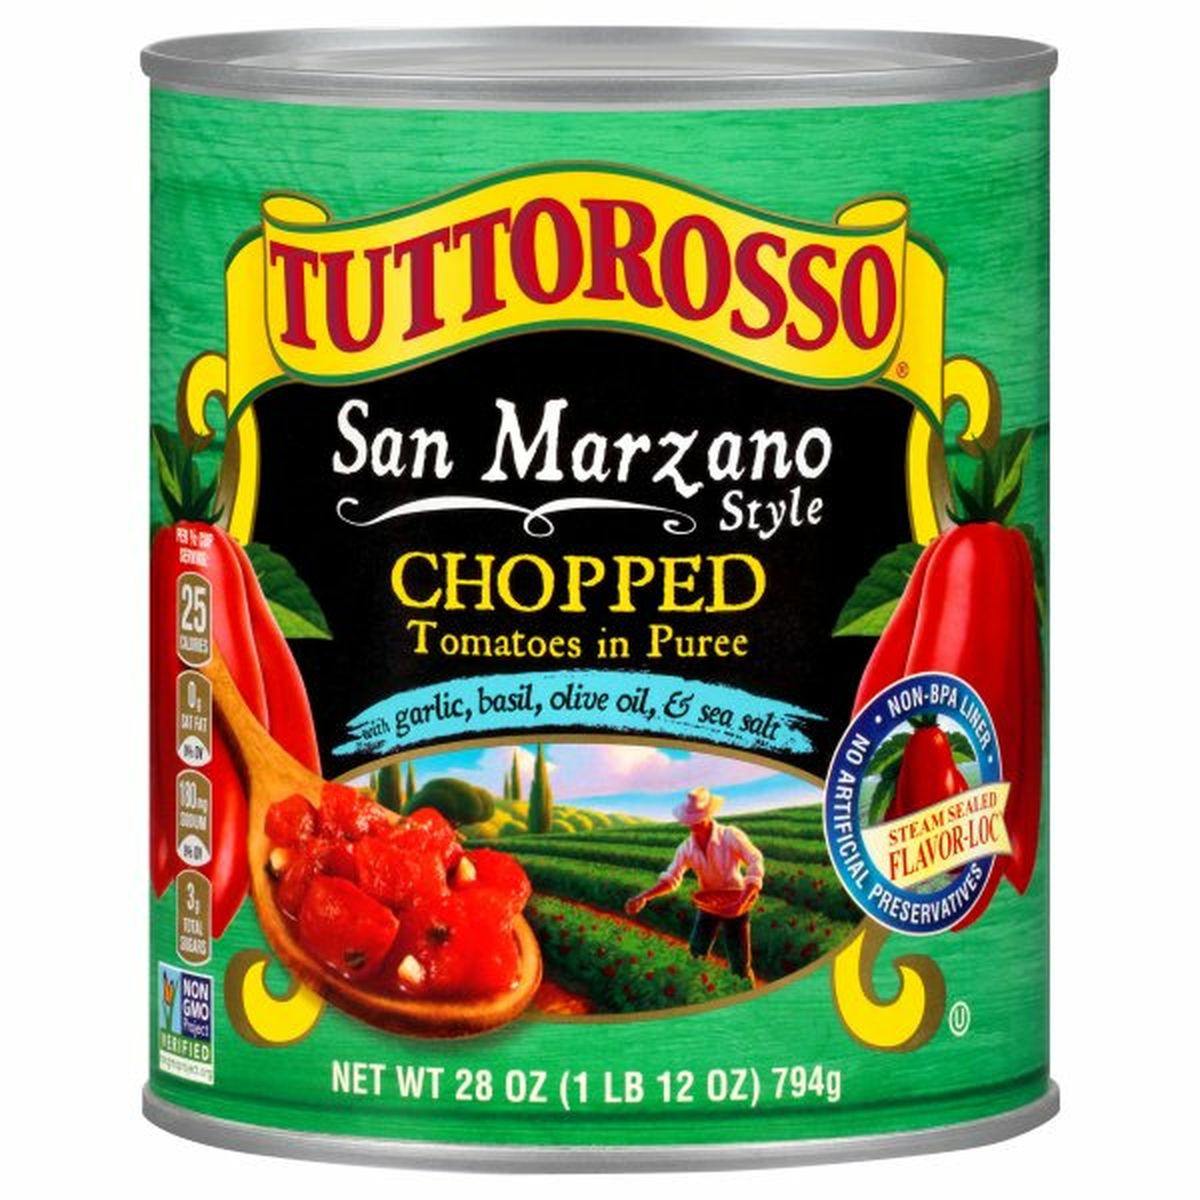 Calories in Tuttorosso Tomatoes Tomatoes in Puree, San Marzano Style, Chopped